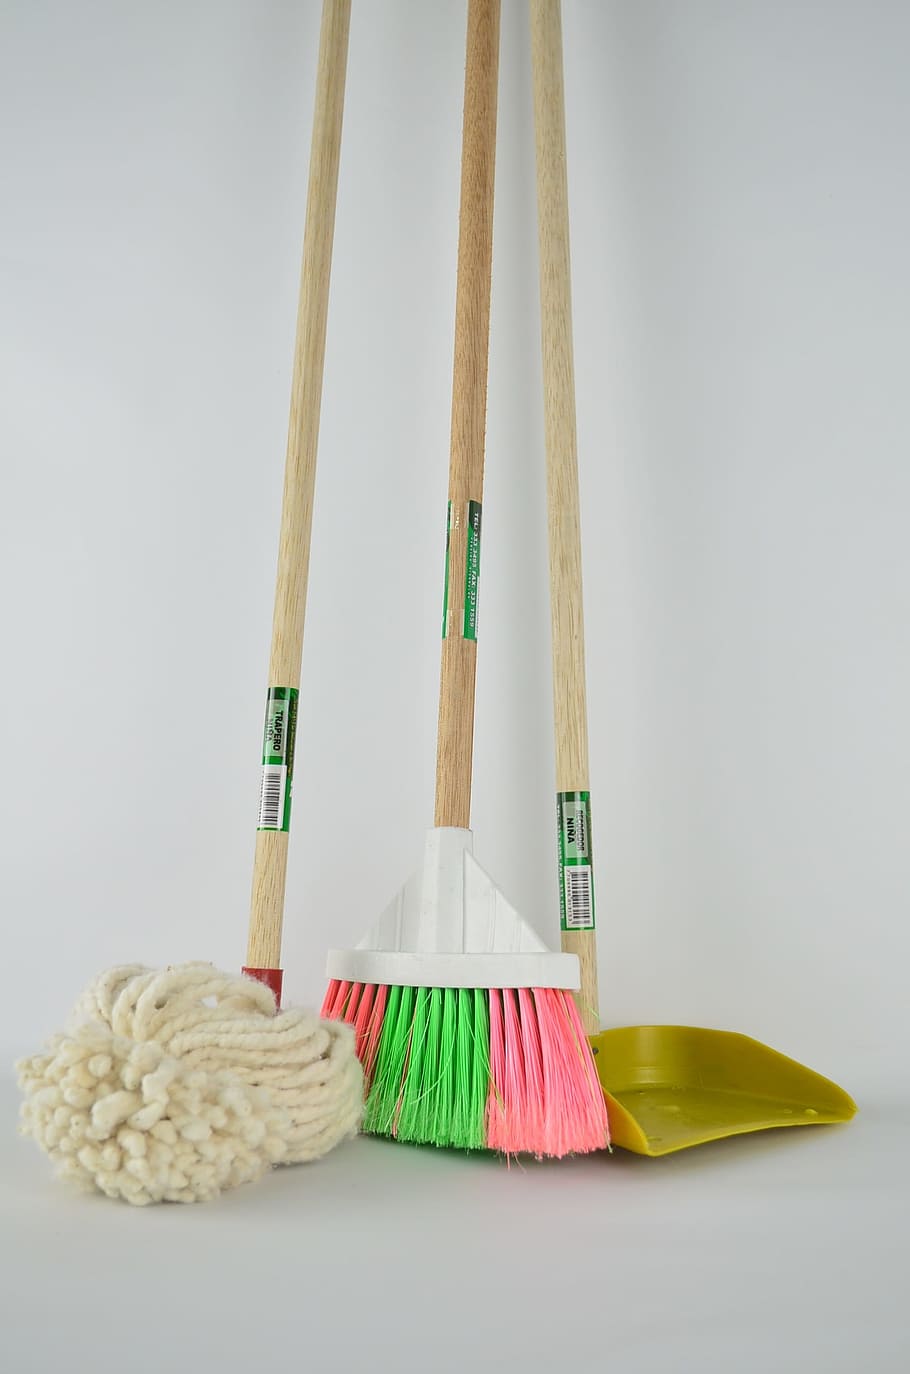 brown wooden mop, broom, and dustpan, Ragpicker, Toilet, cleaning